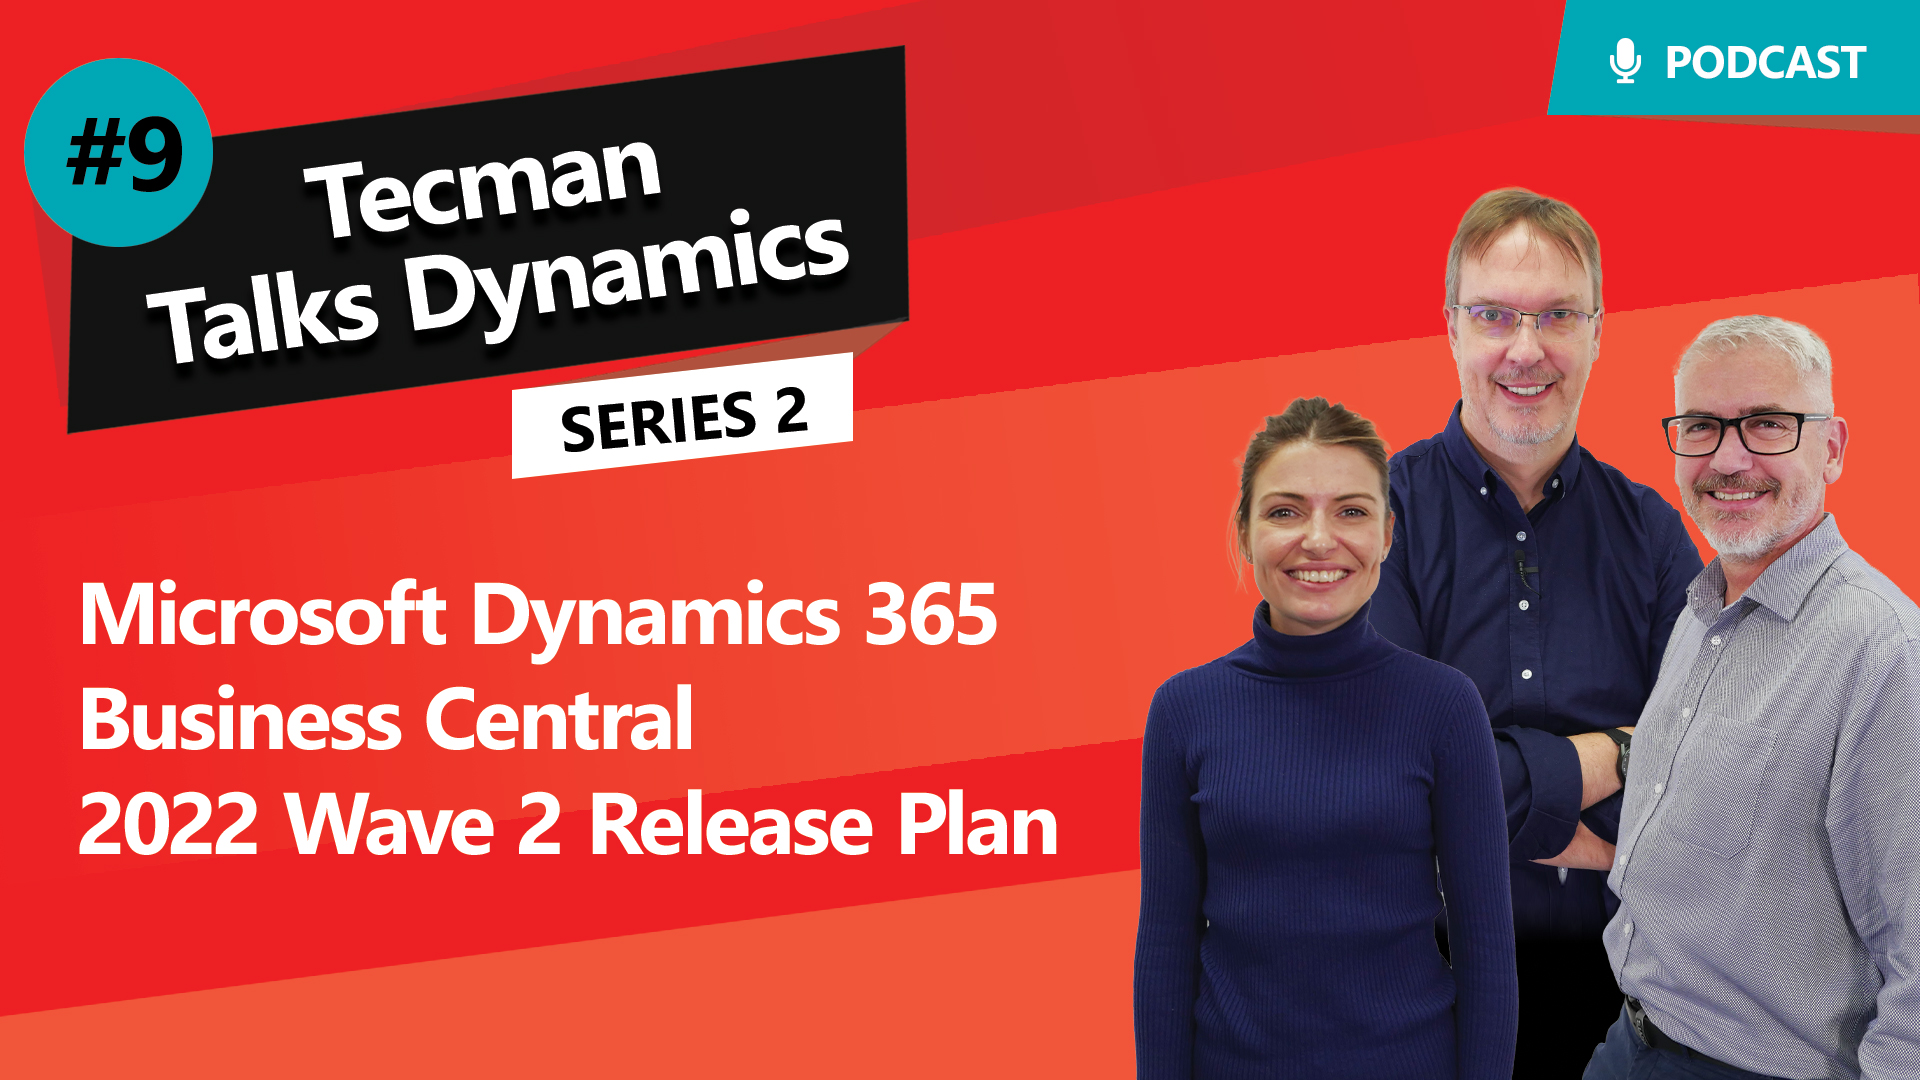 Series 2 Ep9: Microsoft Dynamics 365 2022 Business Central Wave 2 Release Plan